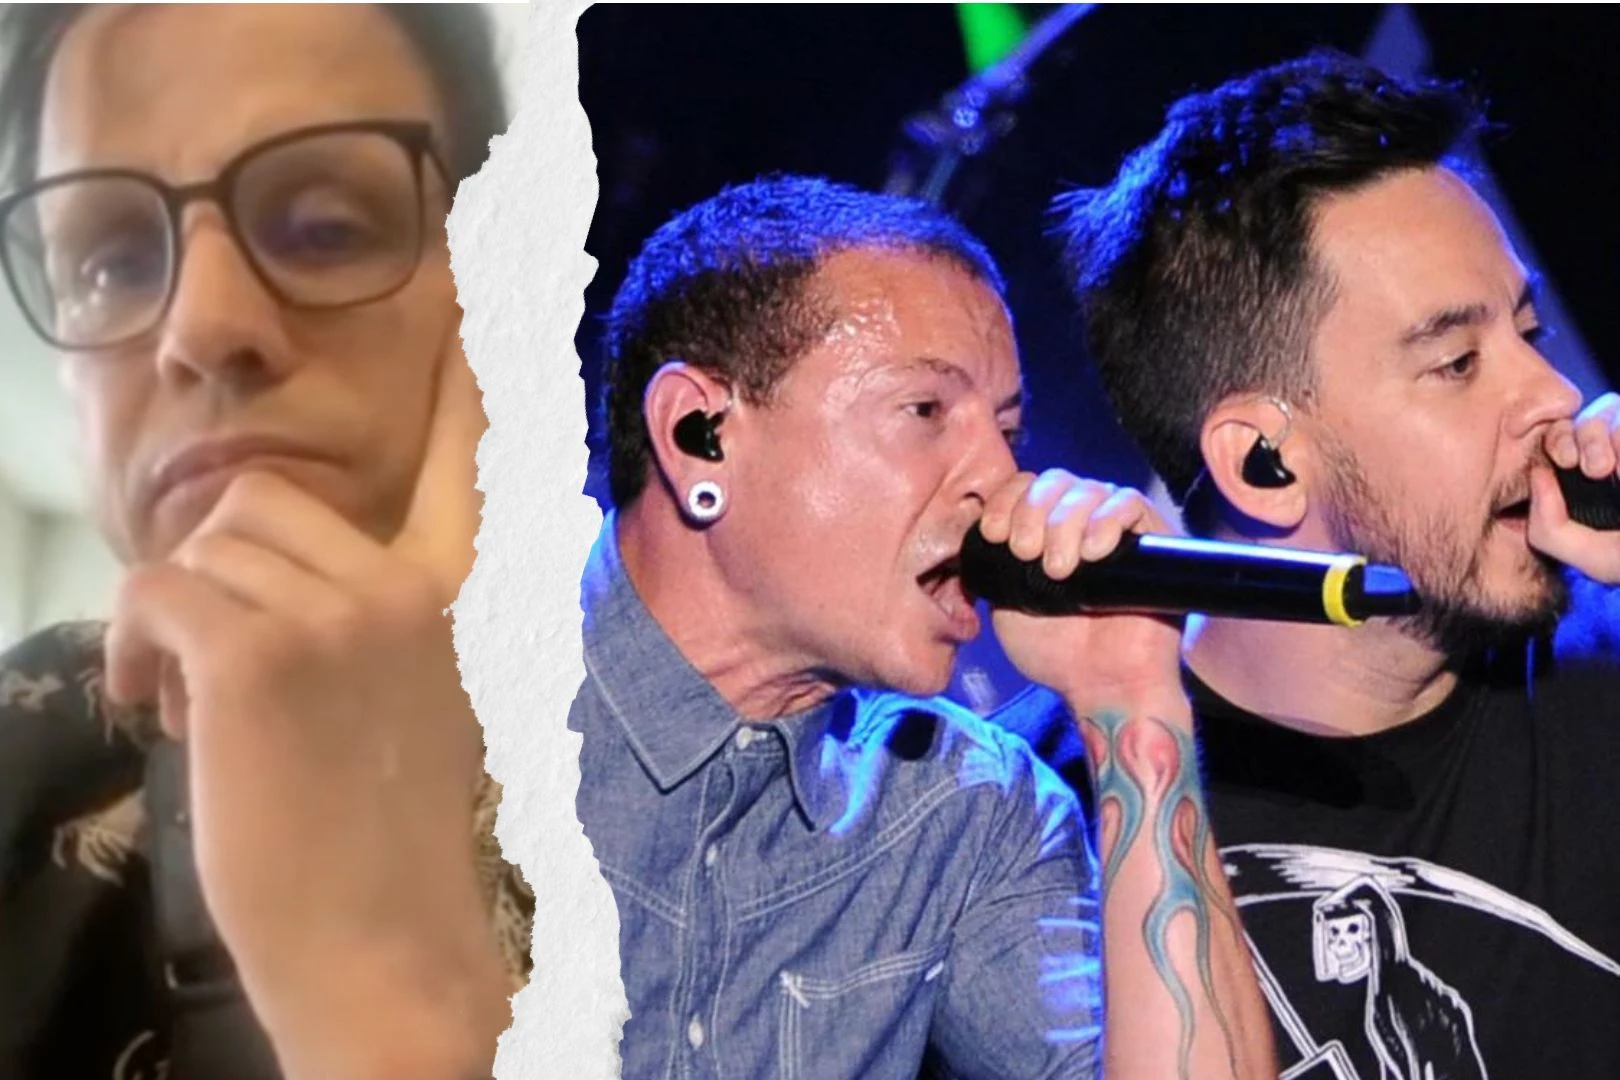 Orgy Singer’s Confusing Statement About His Linkin Park Comments